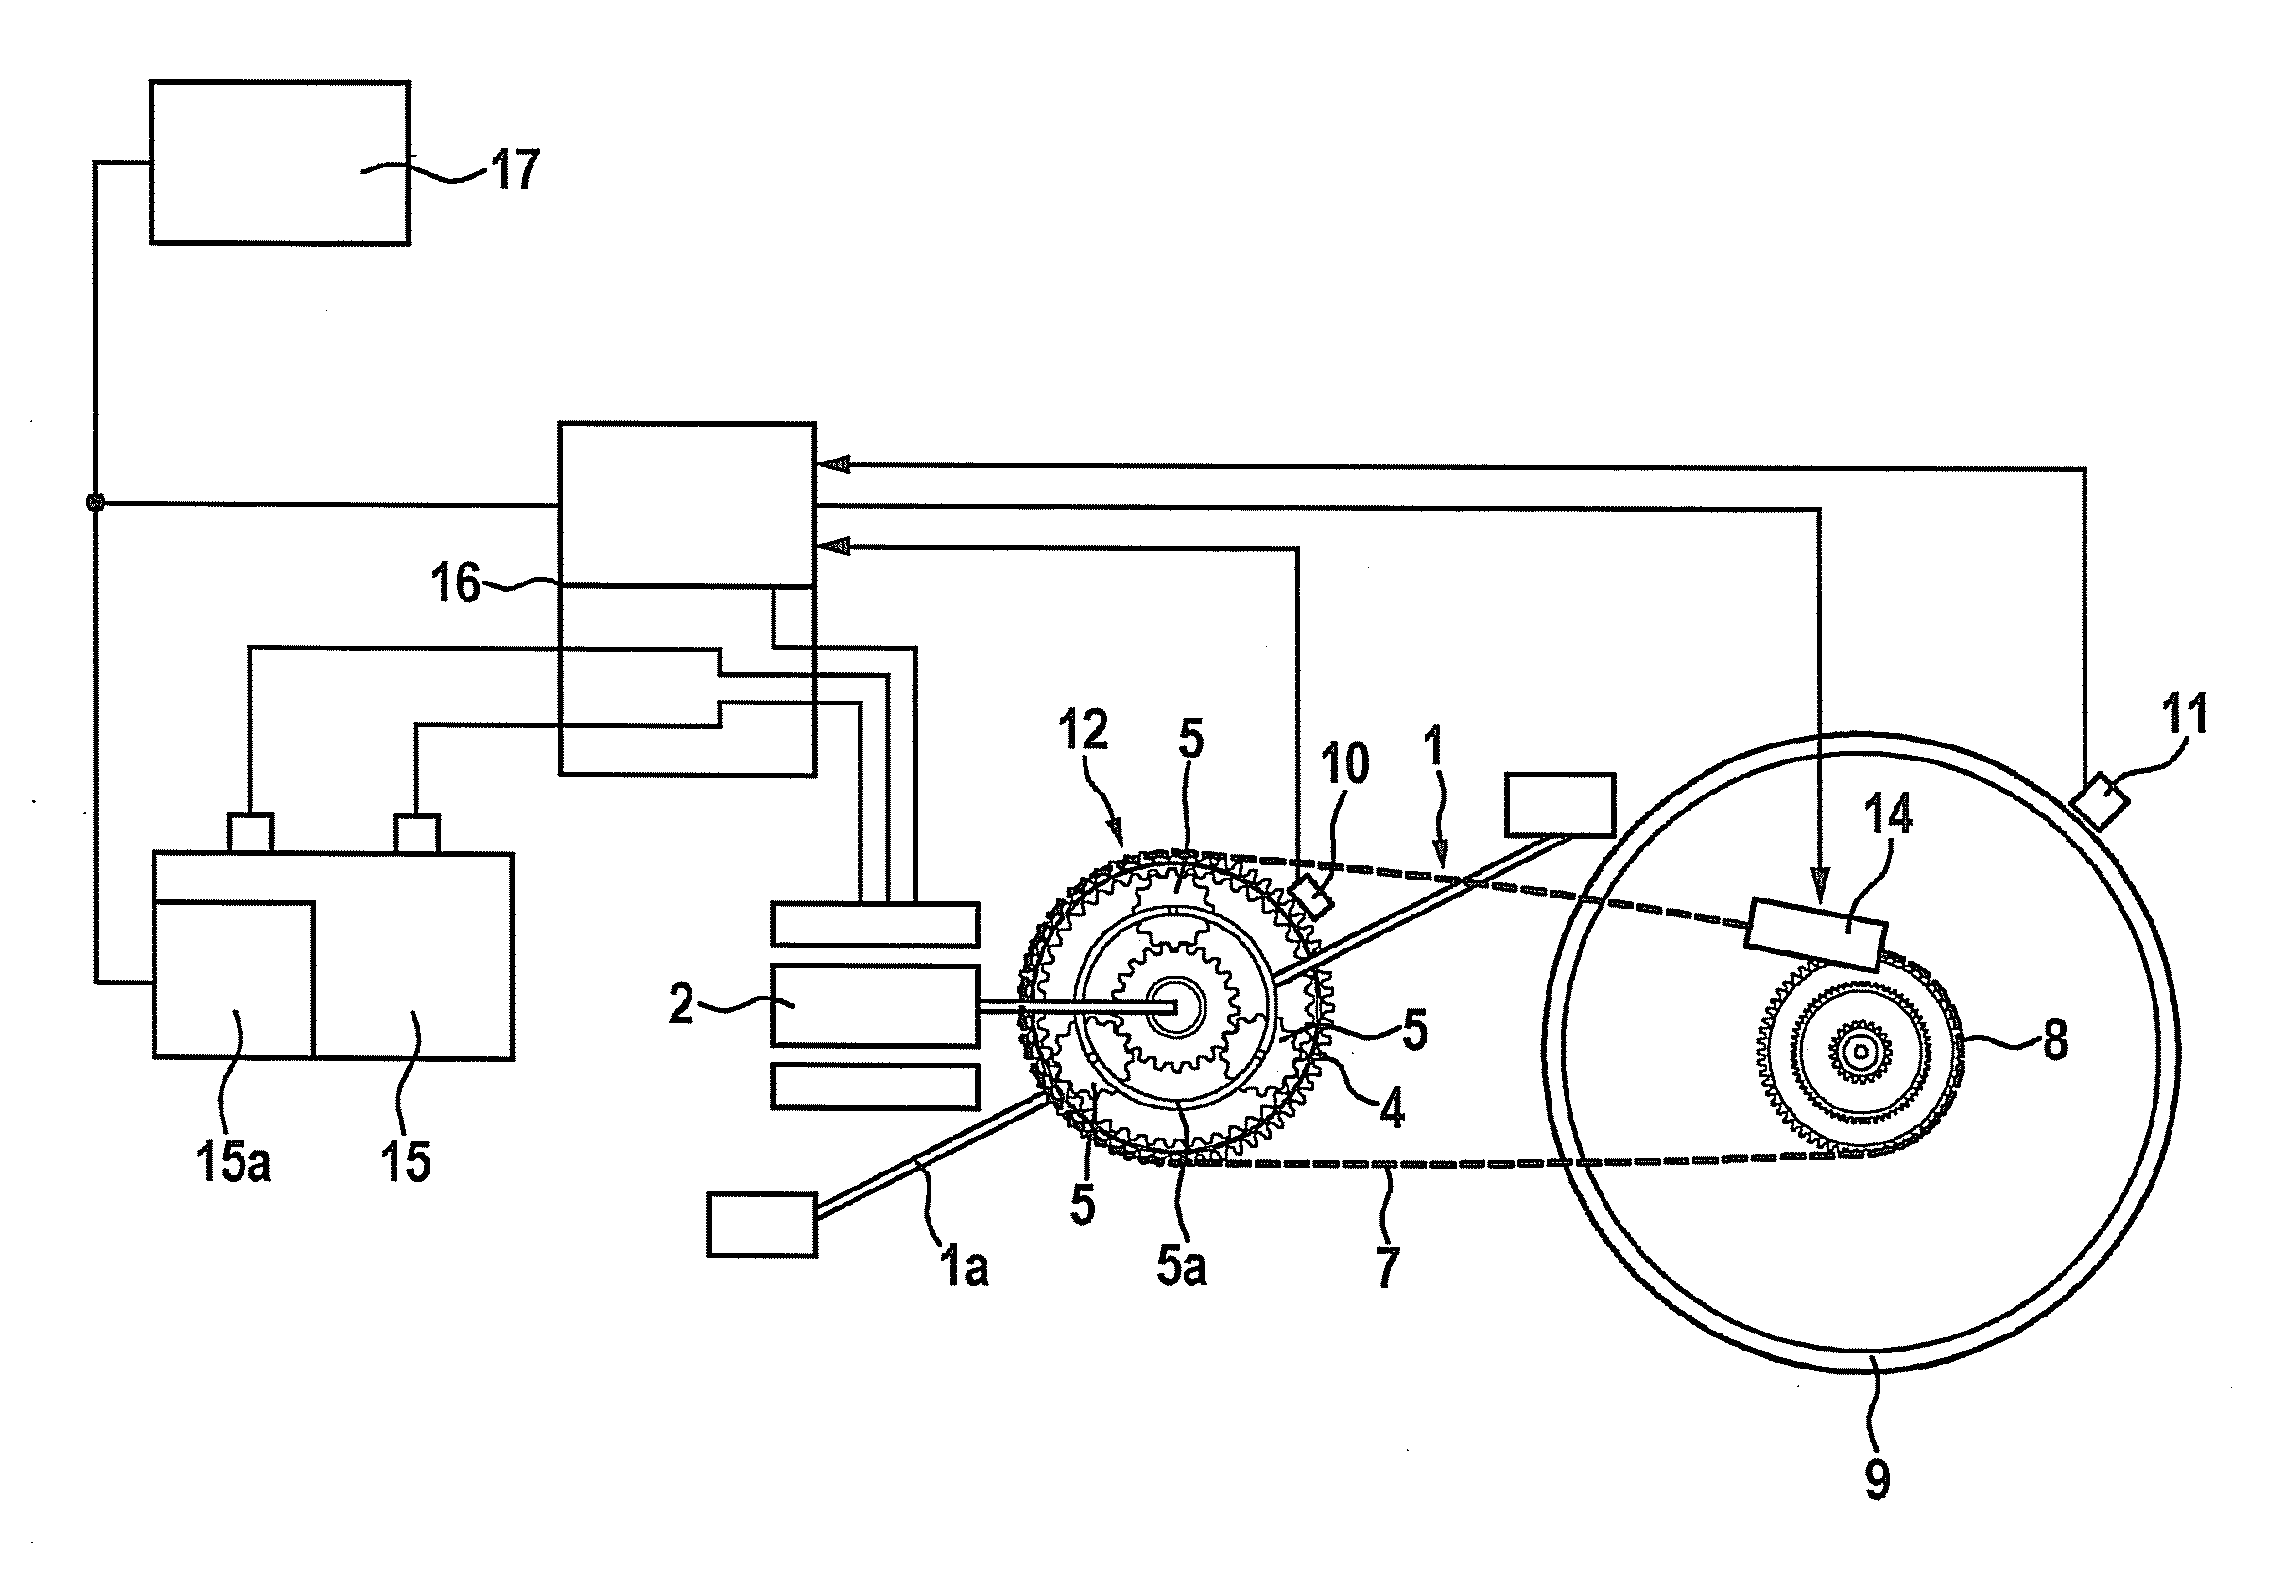 Hybrid drive for an electric bicycle